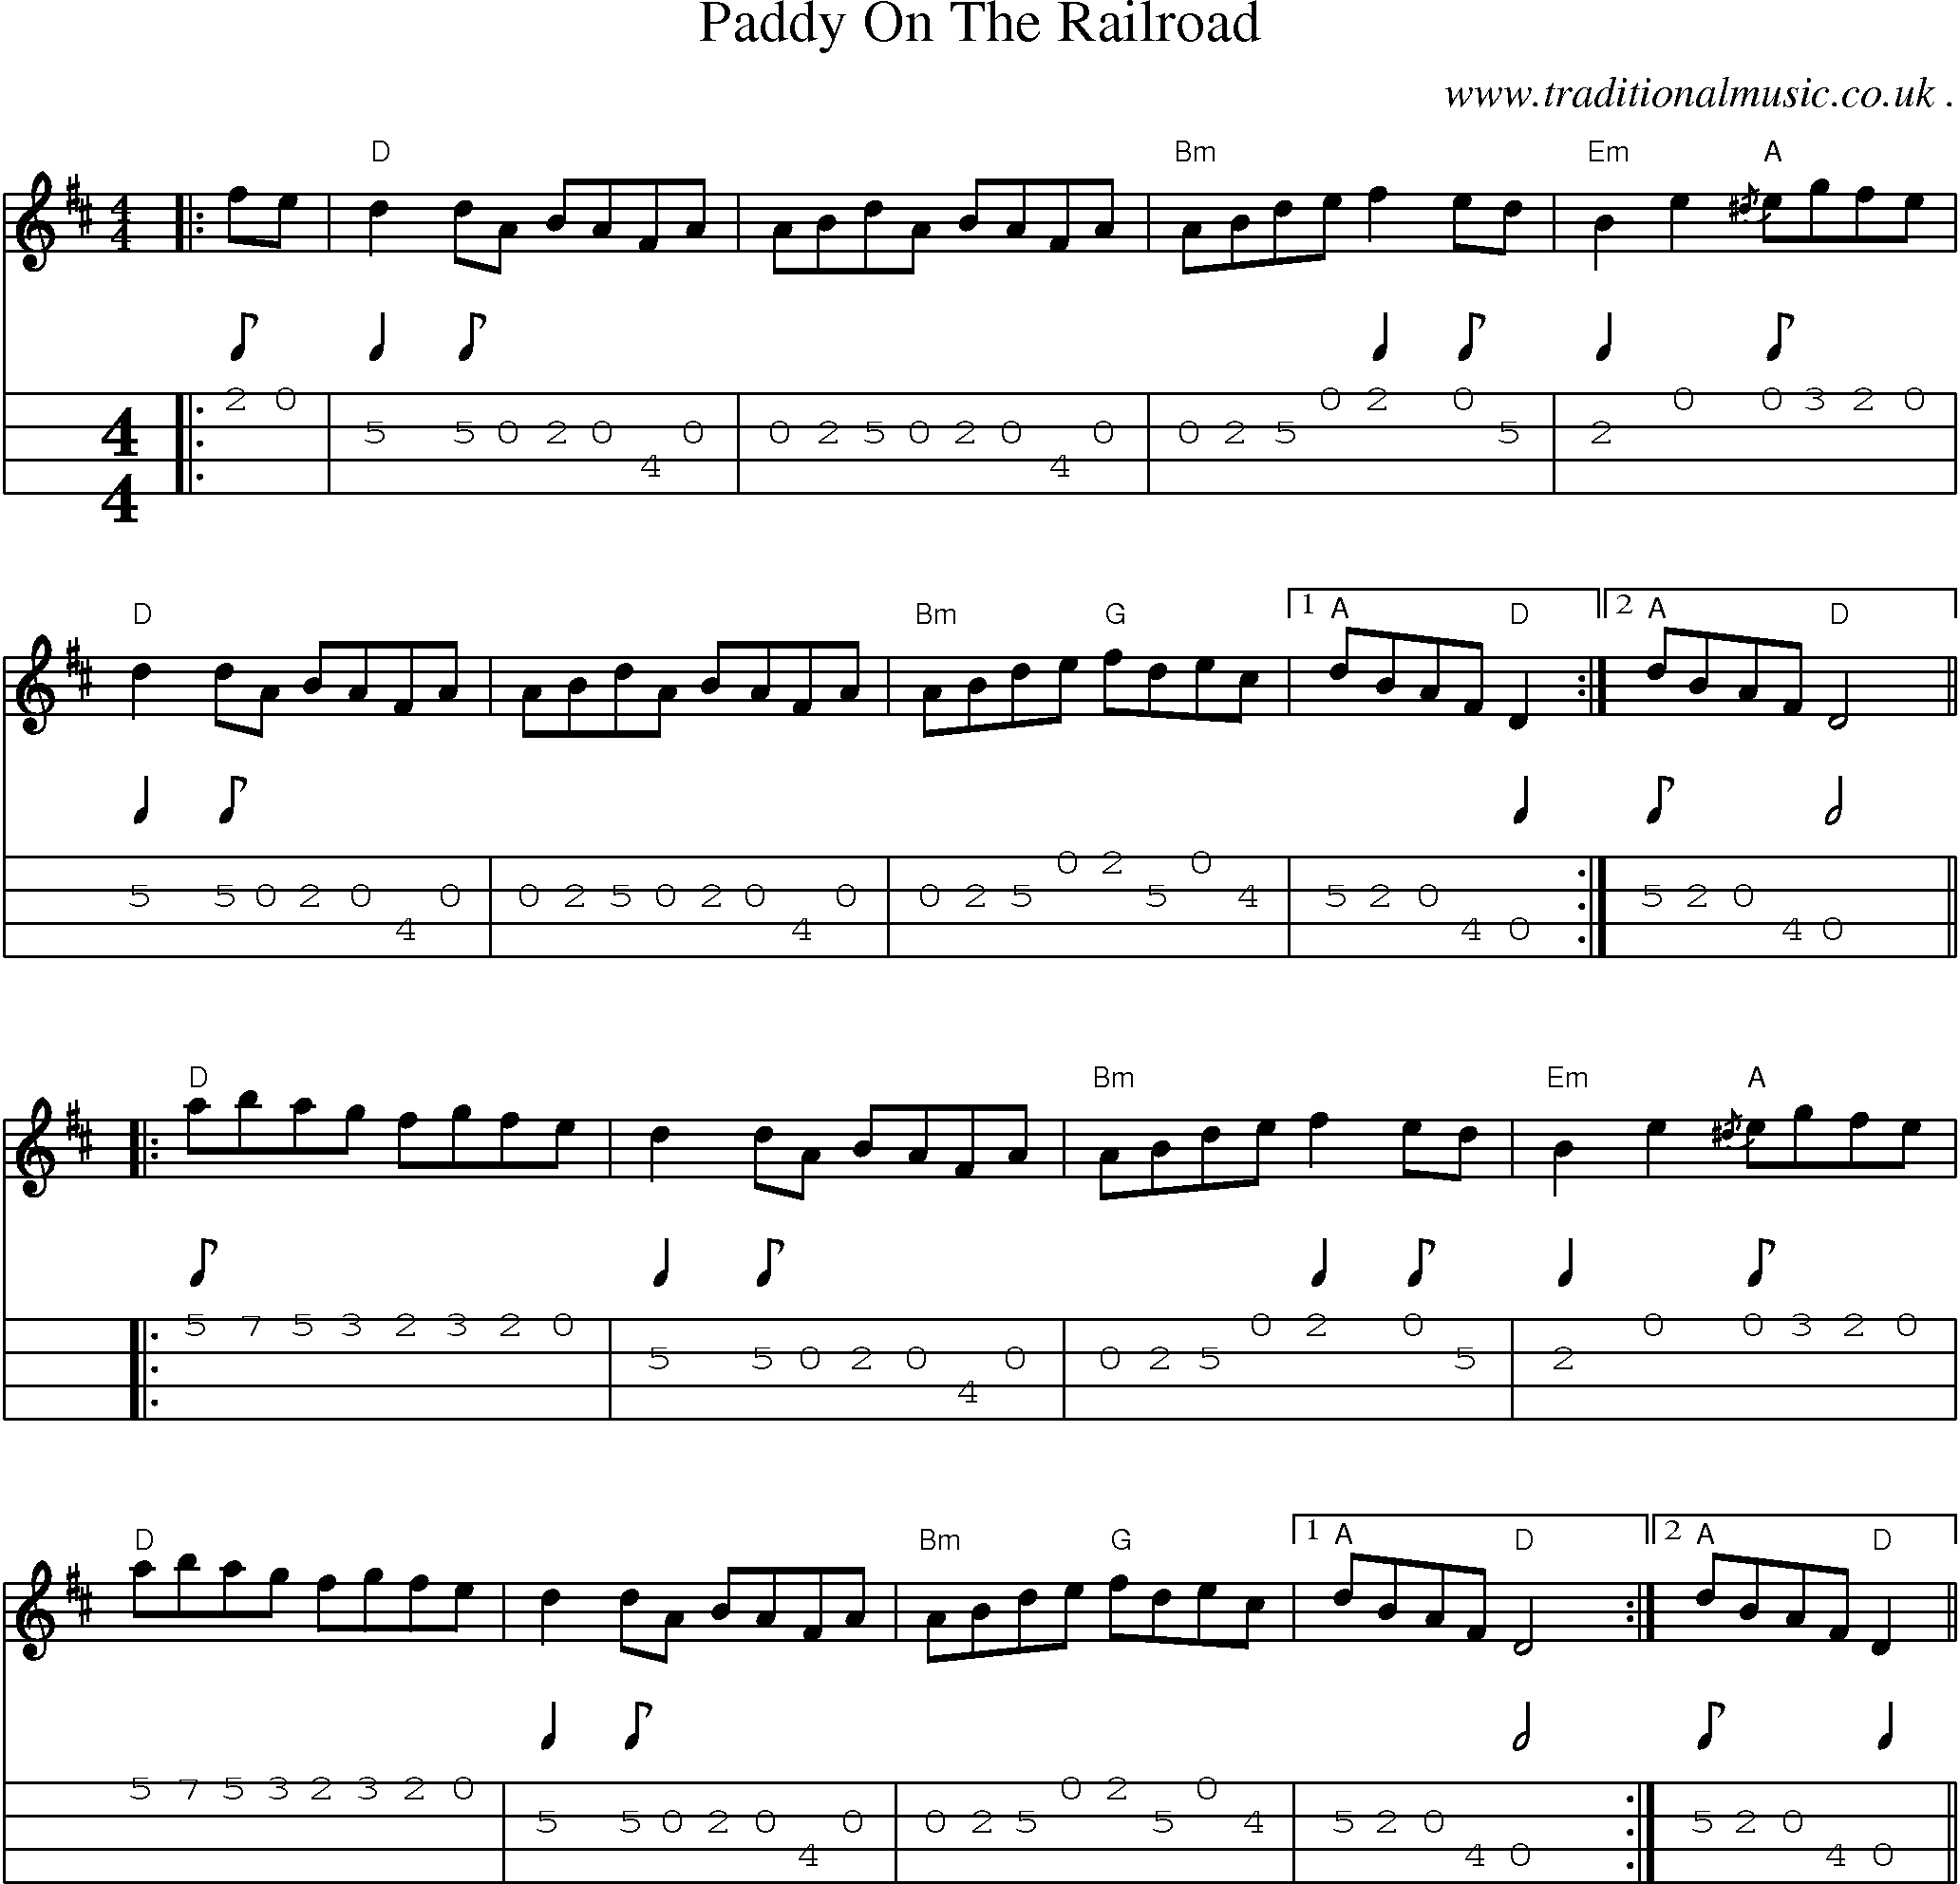 Music Score and Guitar Tabs for Paddy On The Railroad